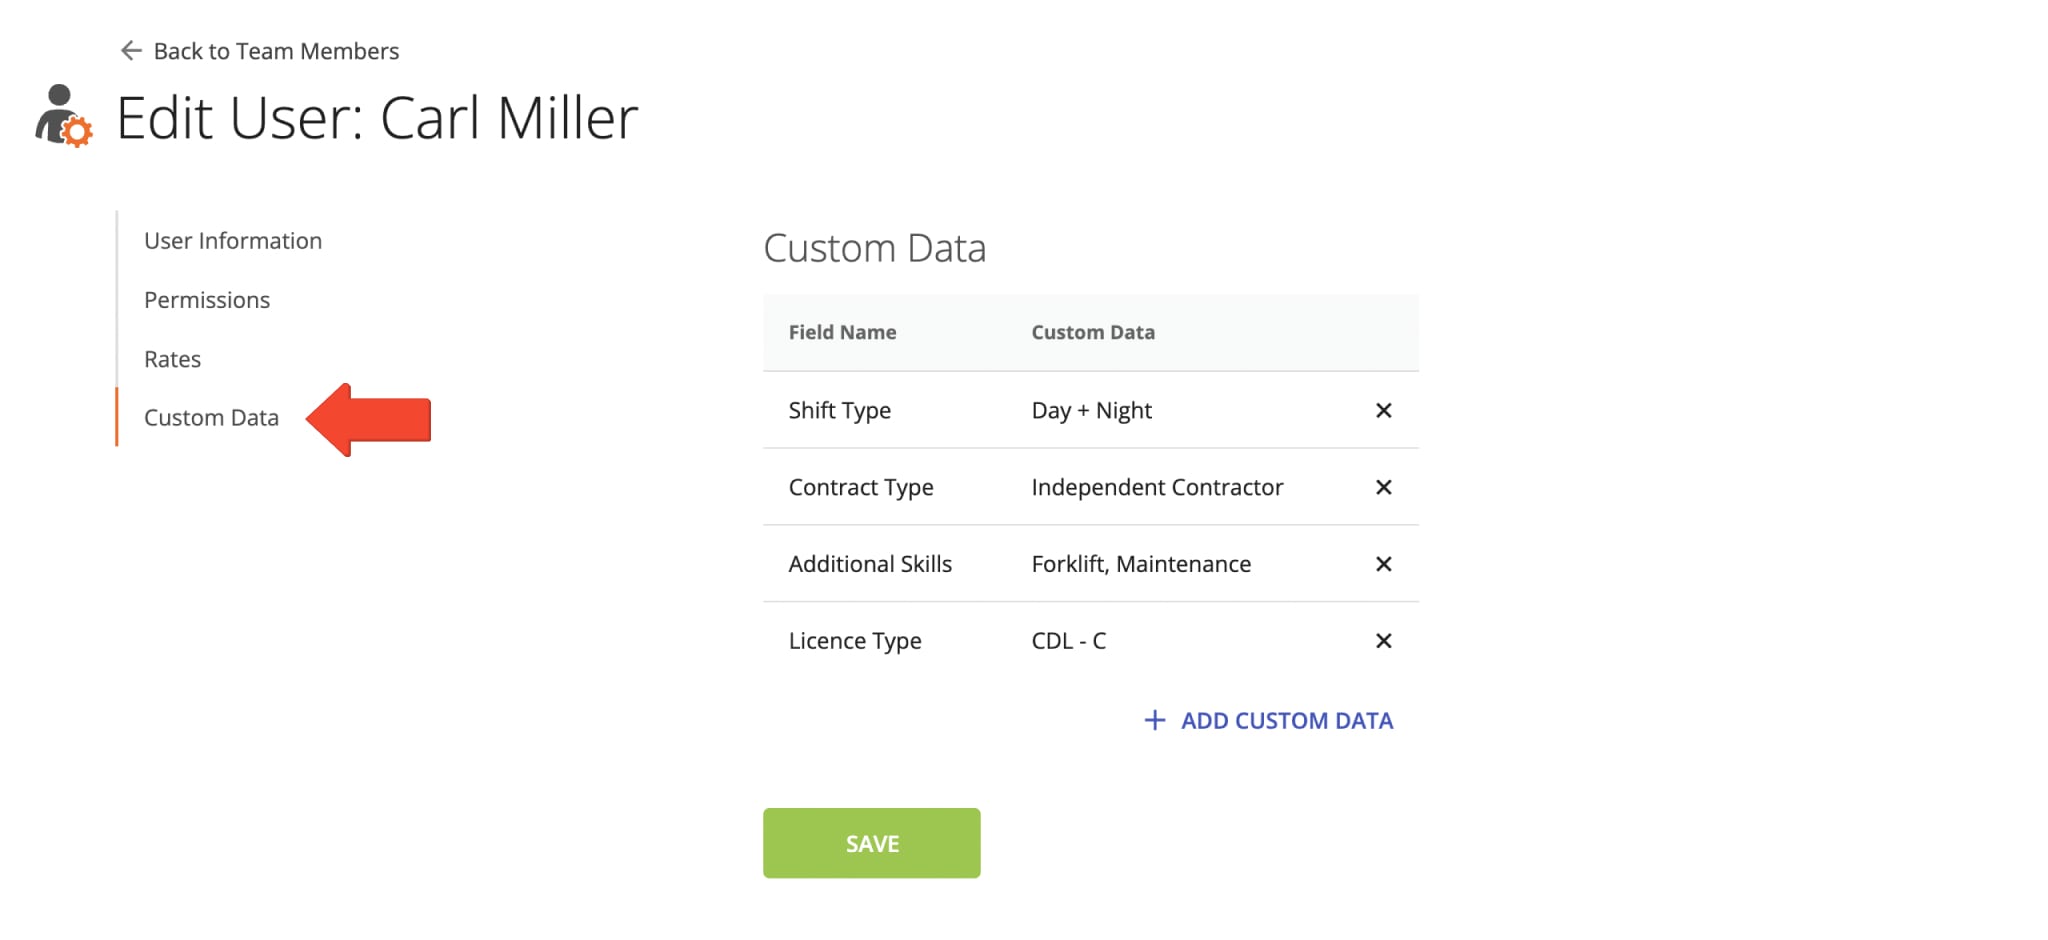 Add and edit custom data attached to drivers, route planners, dispatchers, and other team member profiles.